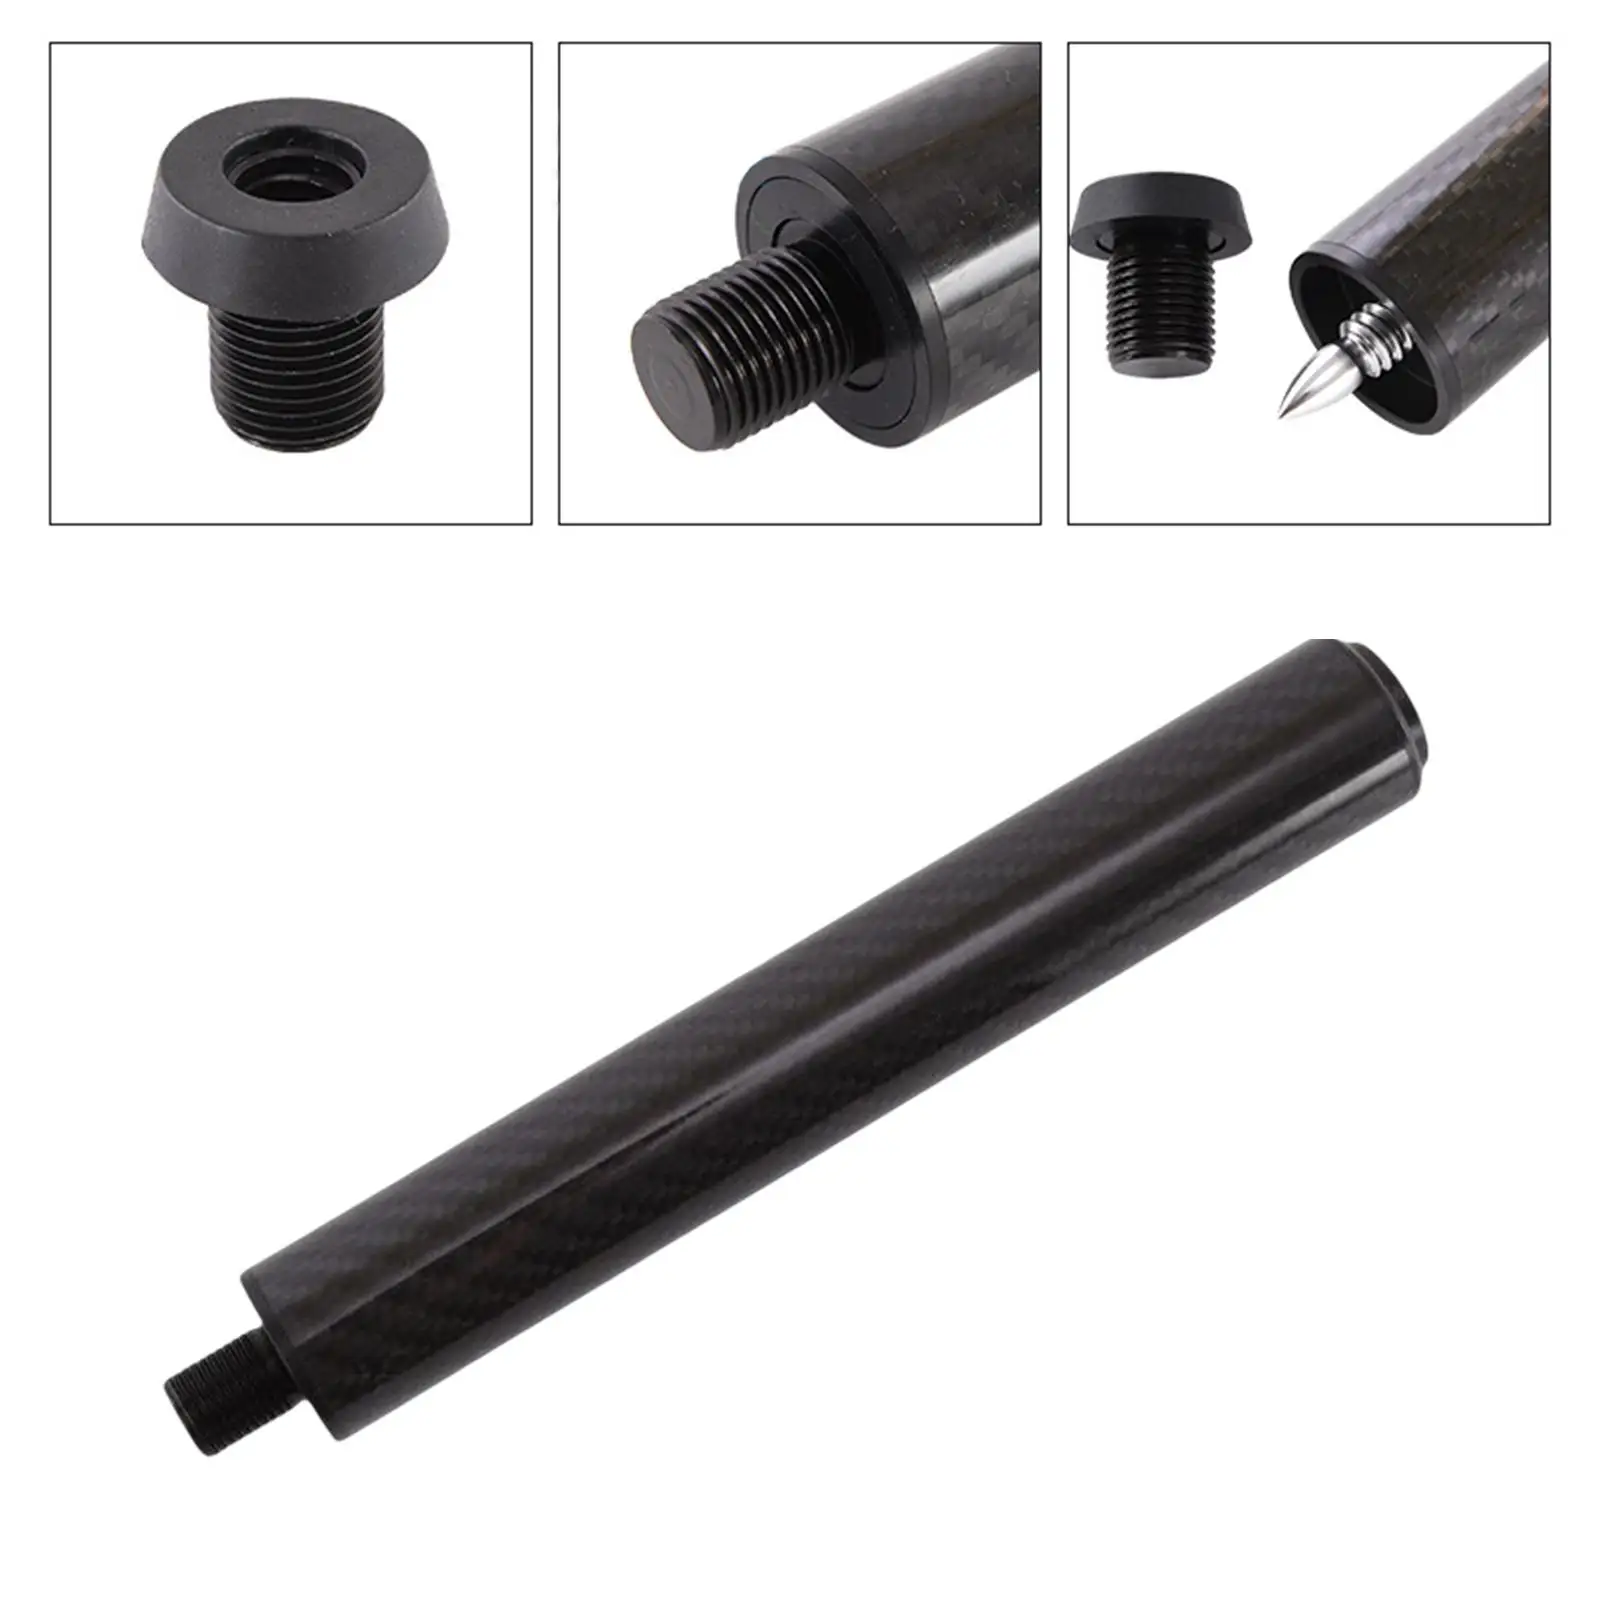 Ultralight Pool Cue Extender Billiards Cue Extension Tool Accessory